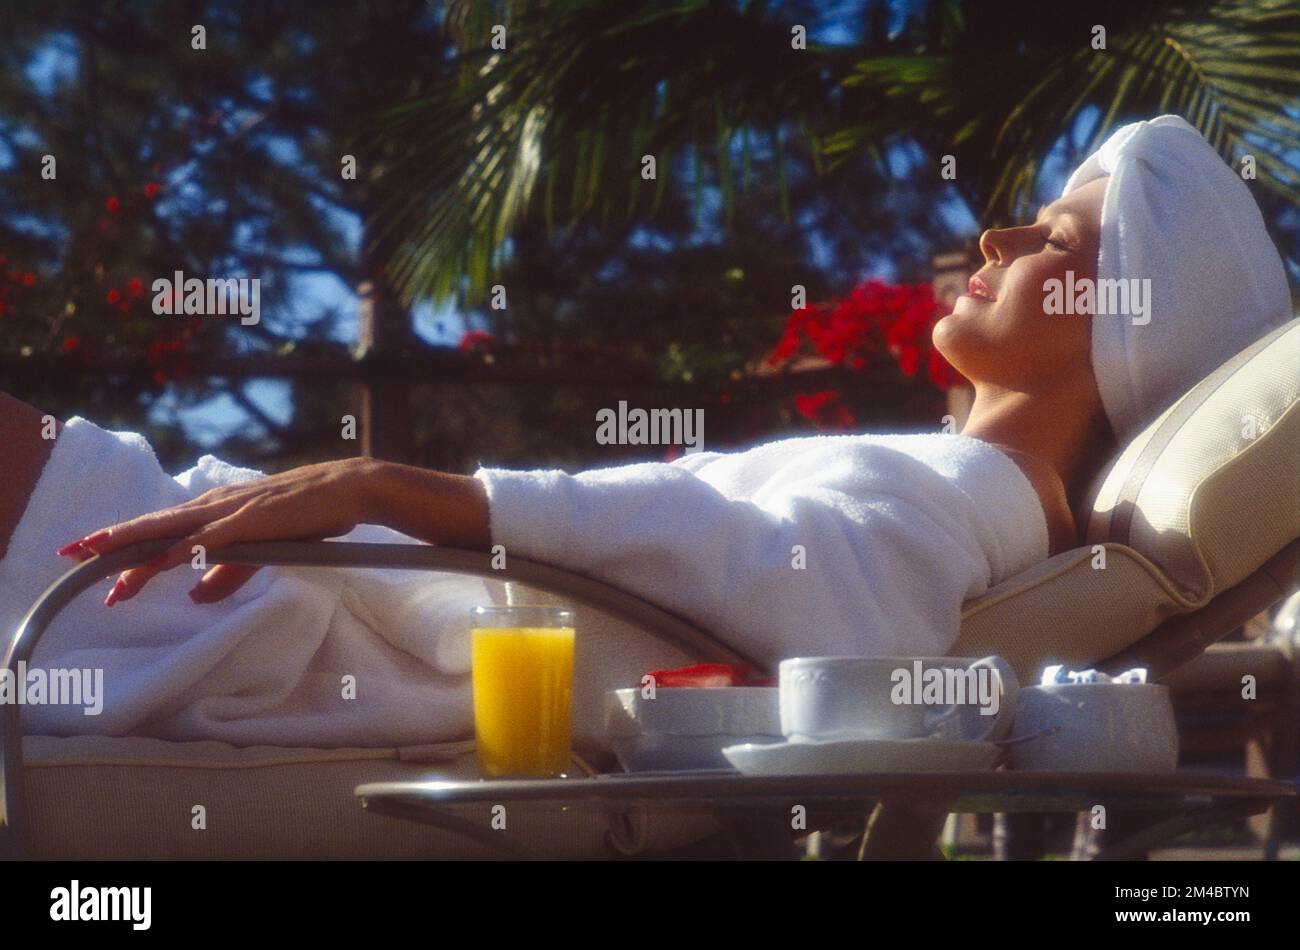 Young woman in white robe and head wrapped in a towel, lying in a lounge chair relaxing Stock Photo